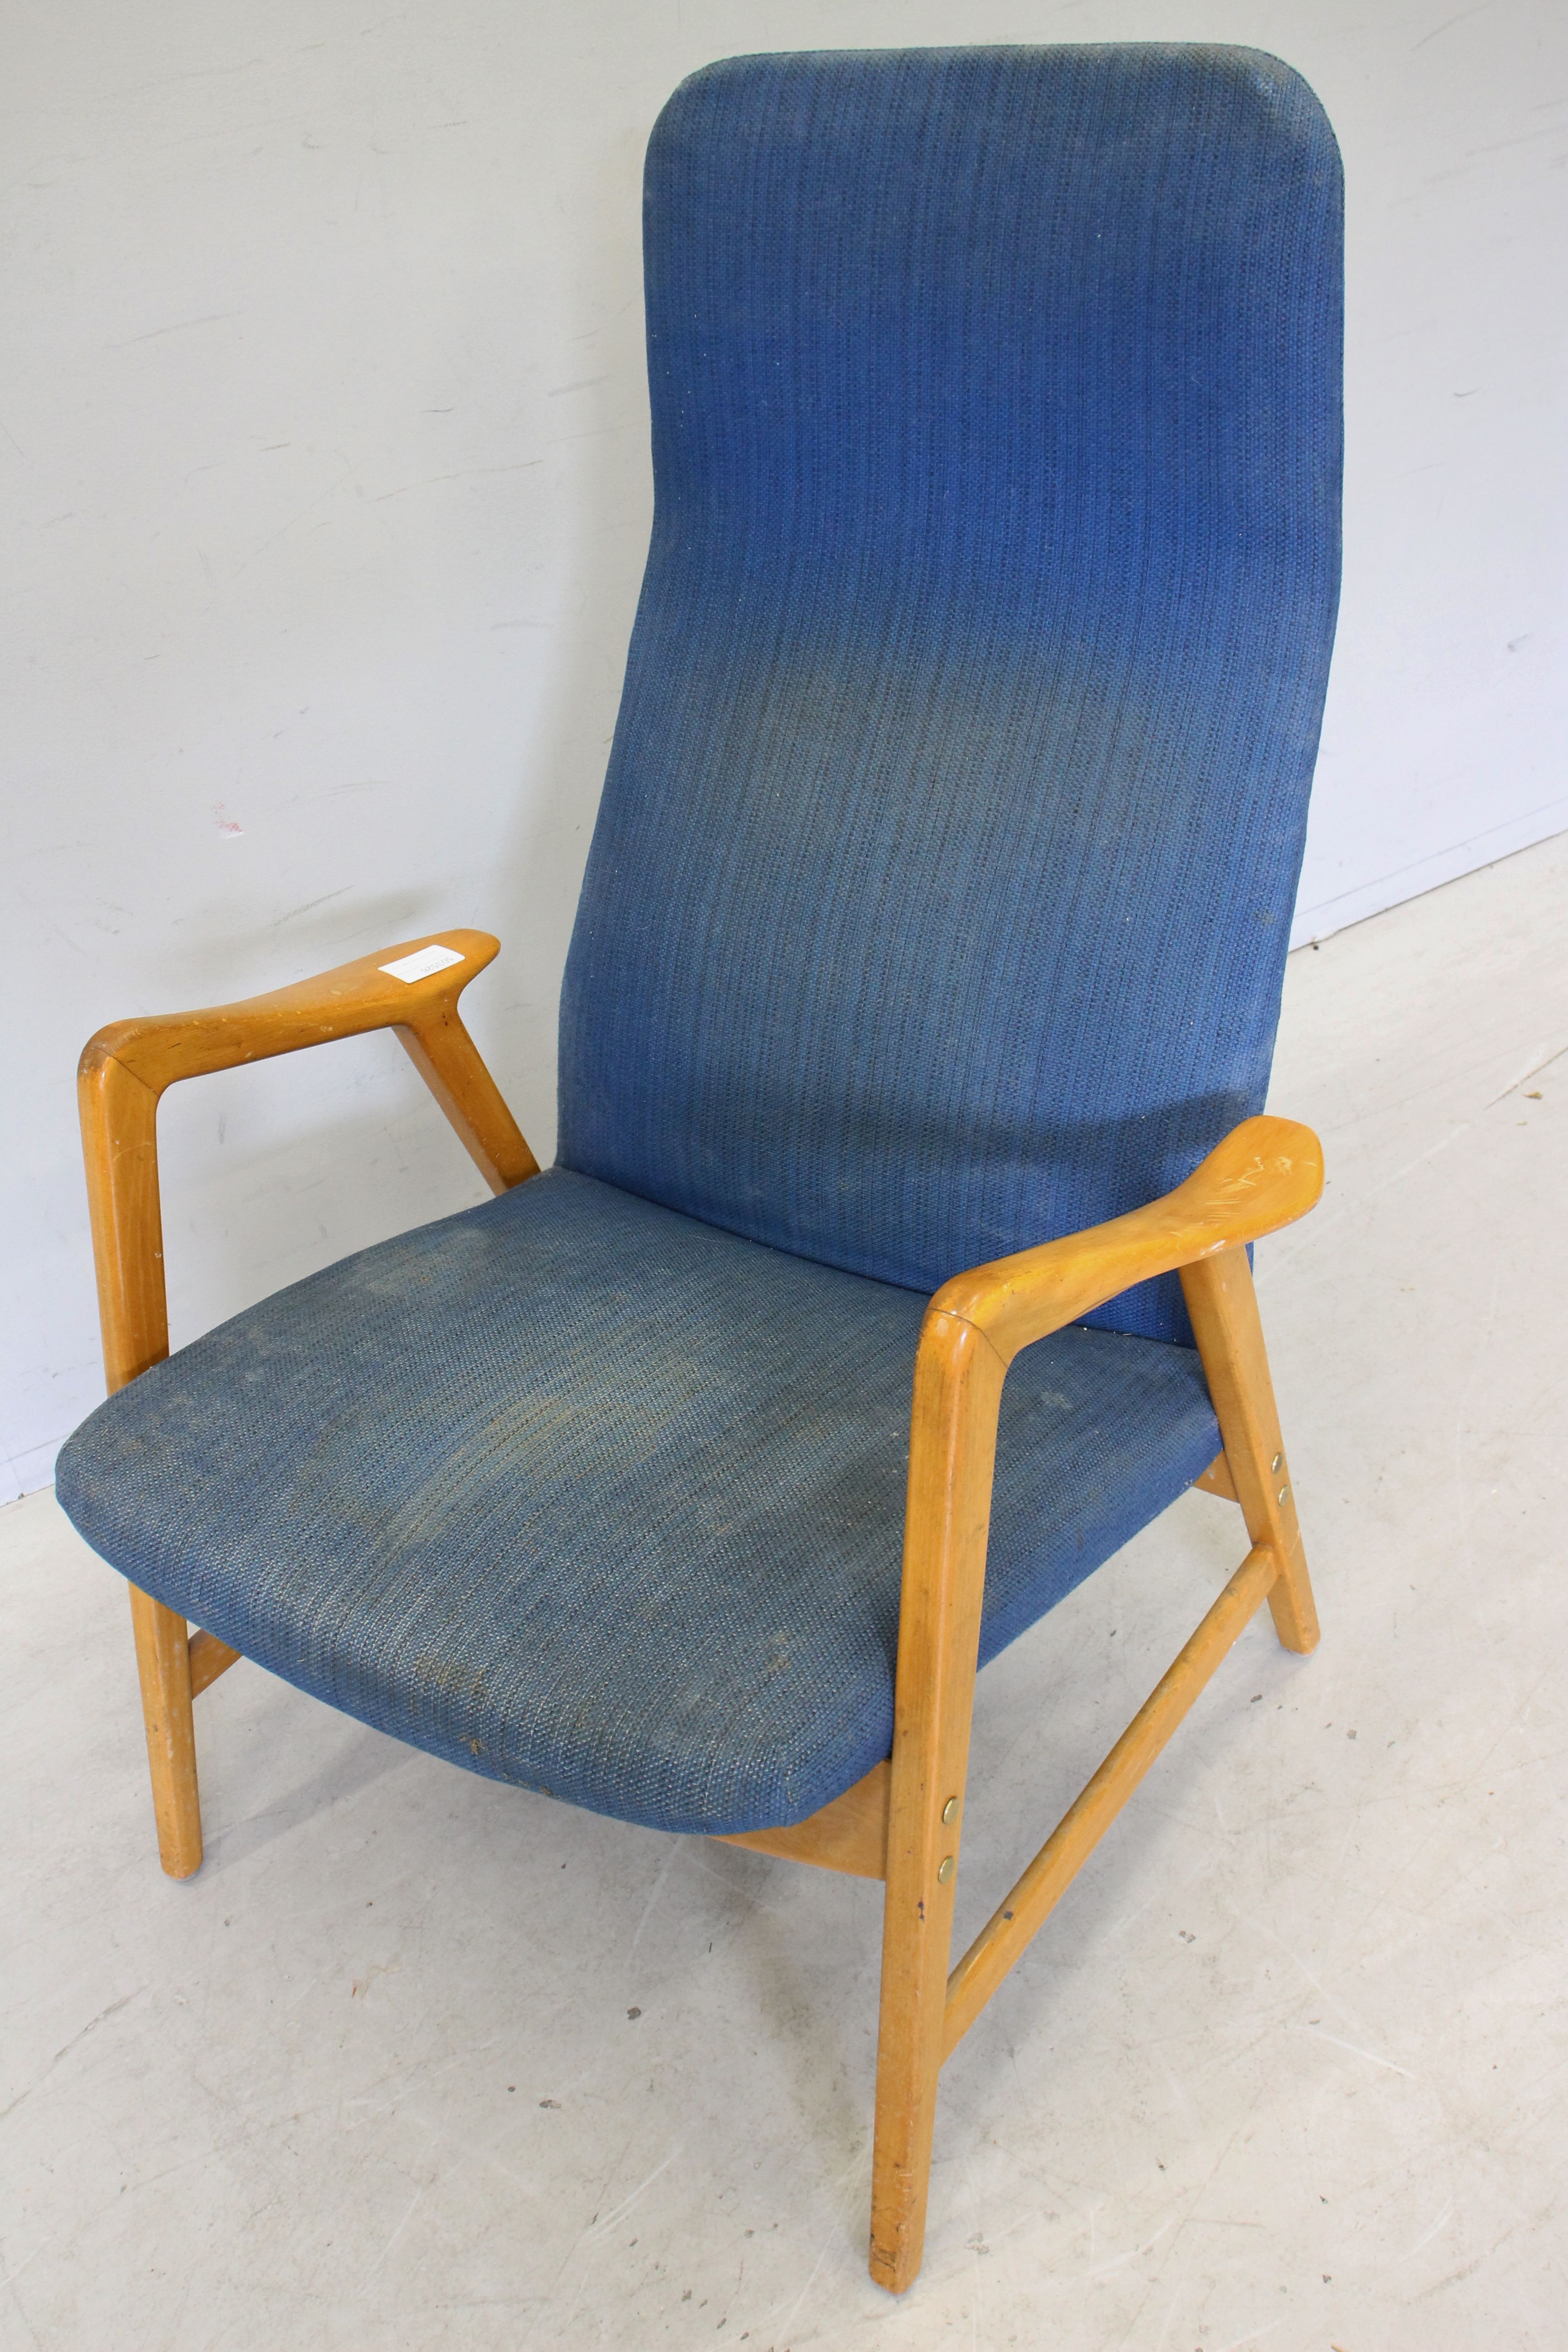 Studio Ljungs Industrier Mid Century Armchair, possibly from Alf Svensson